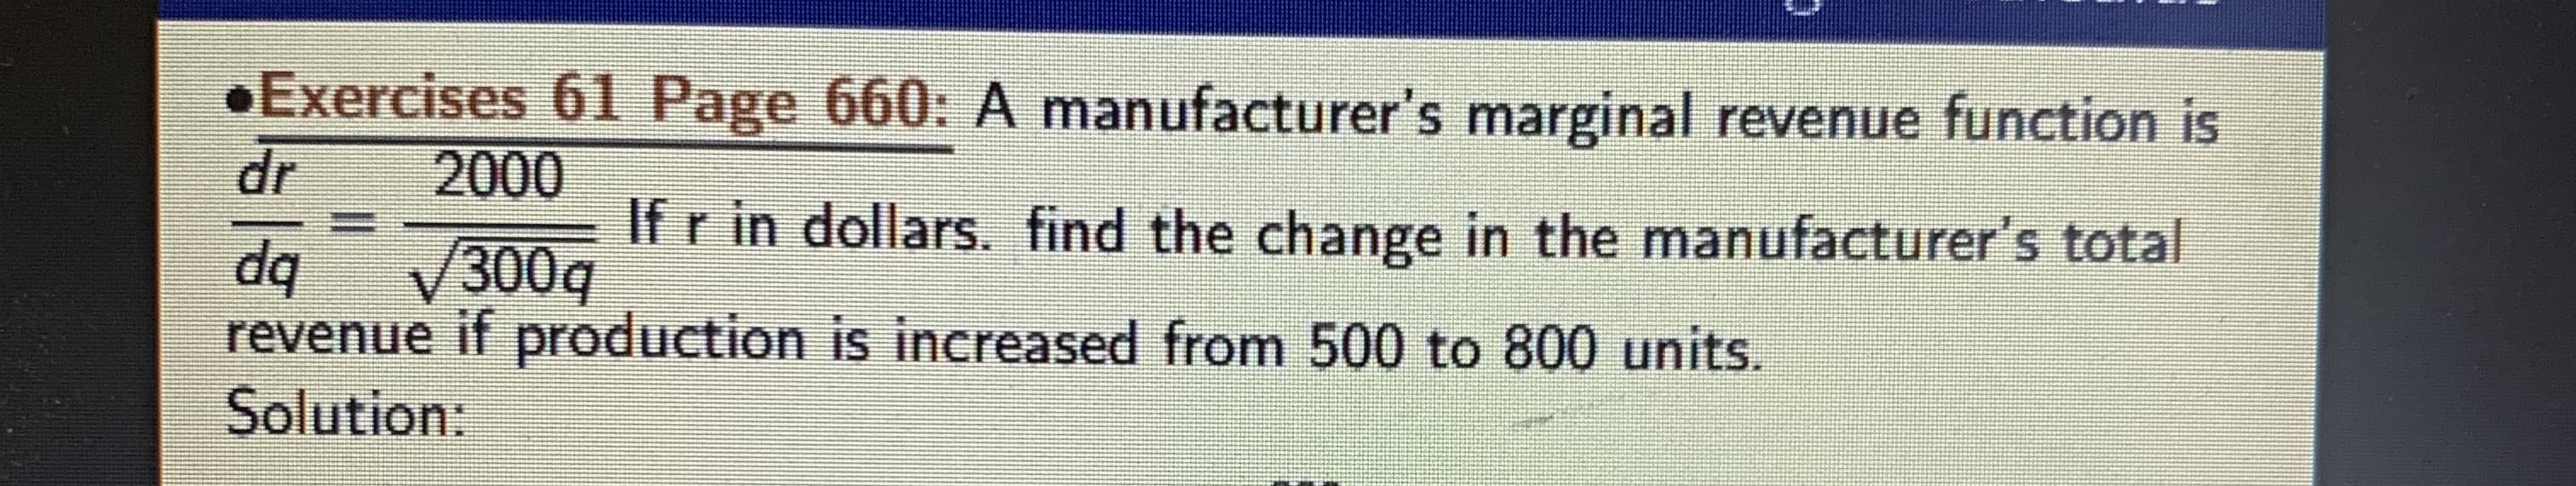 Exercises 61 Page 660: A manufacturer's marginal revenue function is
dr
2000
If r in dollars. find the change in the manufacturer's total
dq
300q
revenue if production is increased from 500 to 800 units.
